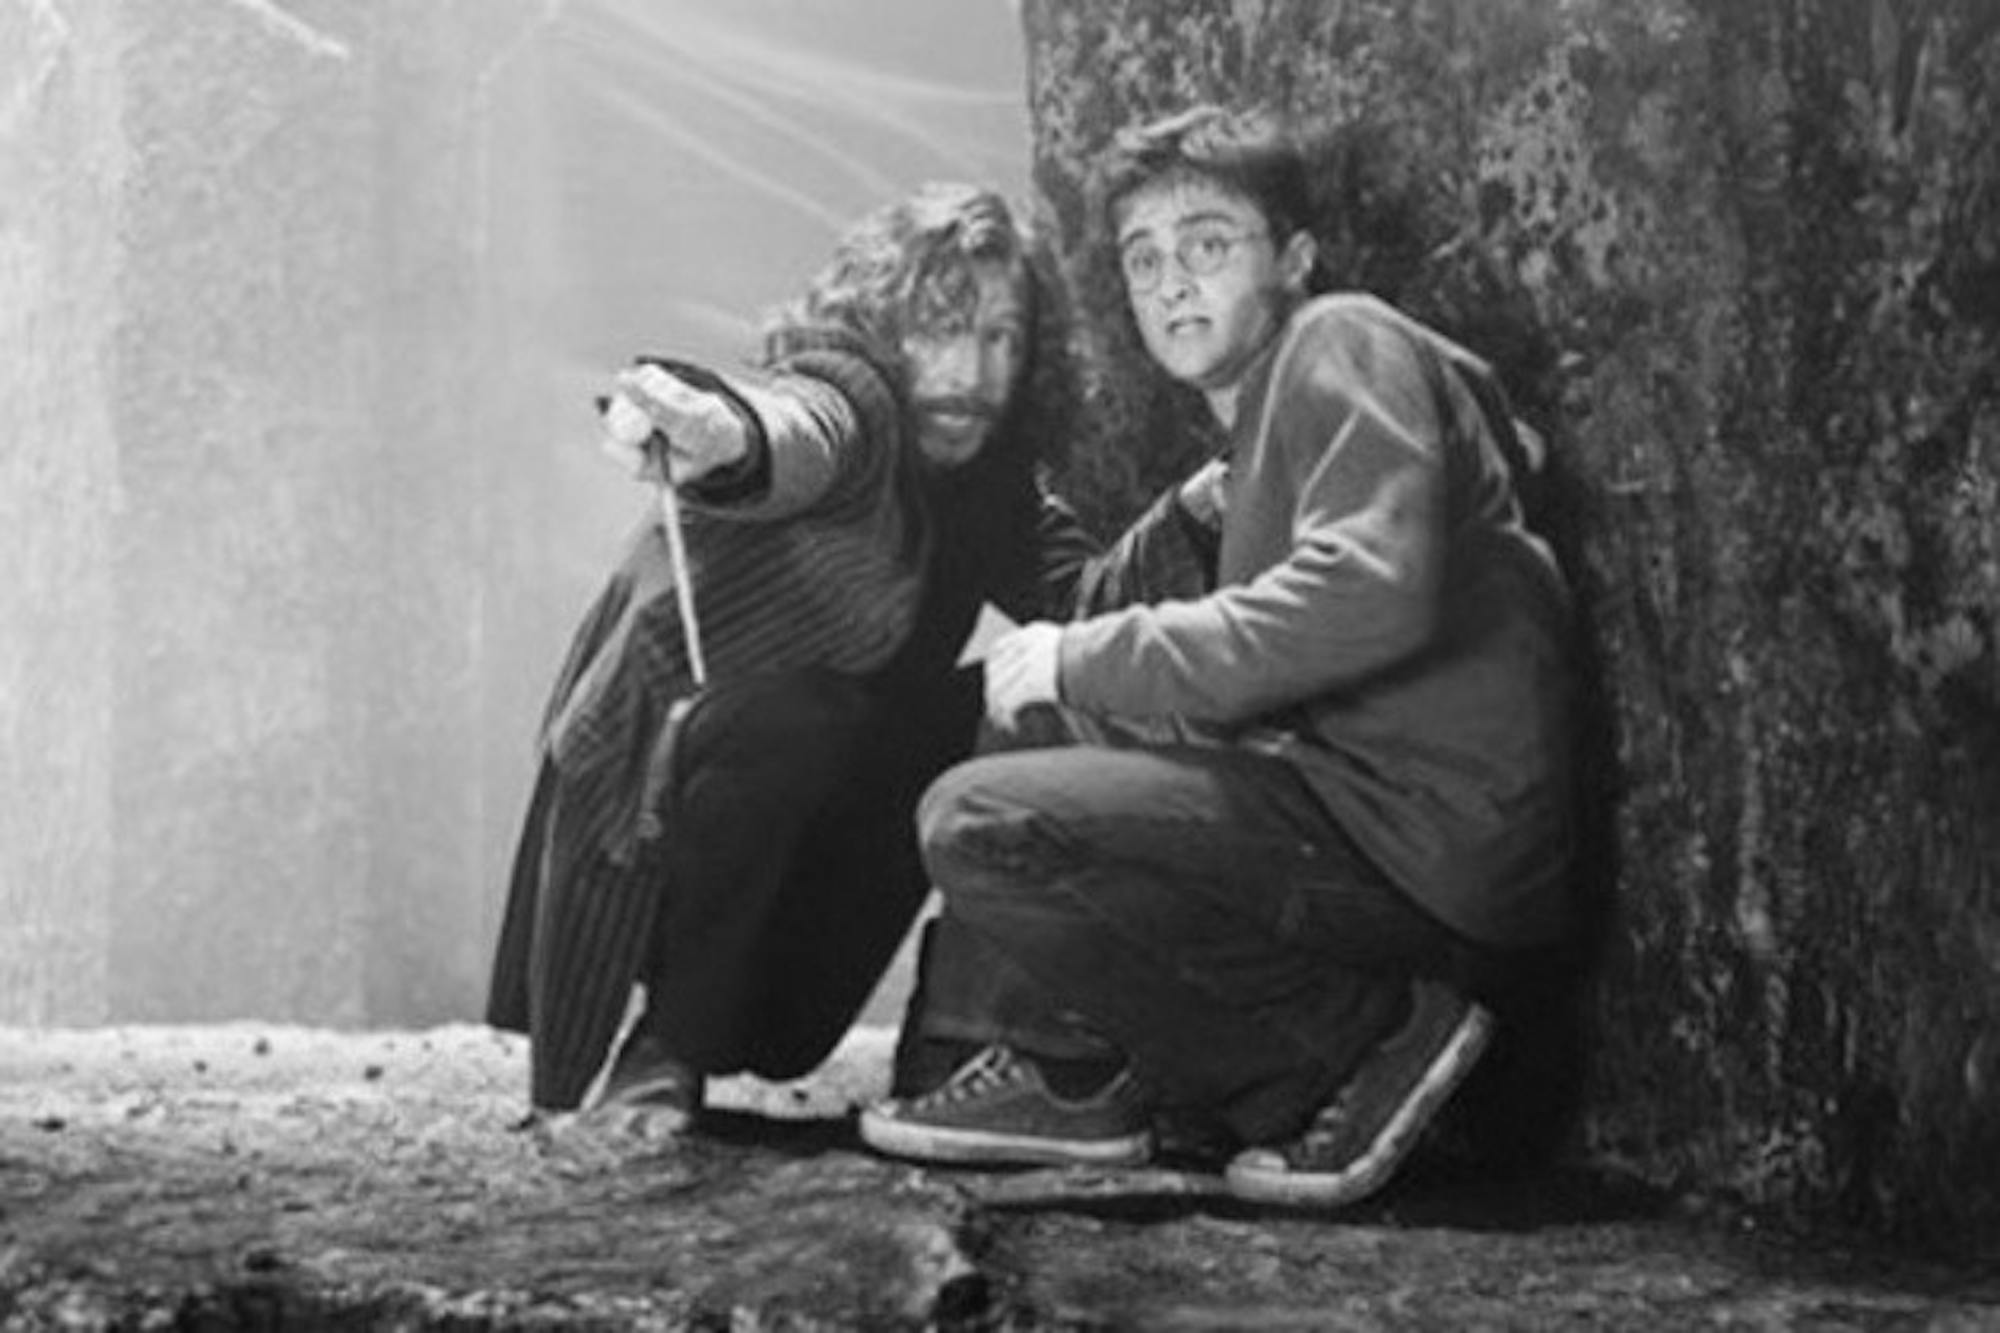 Harry Potter (Daniel Radcliffe) crouches in fear with Sirius Black (Gary Oldman). The fifth movie marks a darker turn in Harry's life.